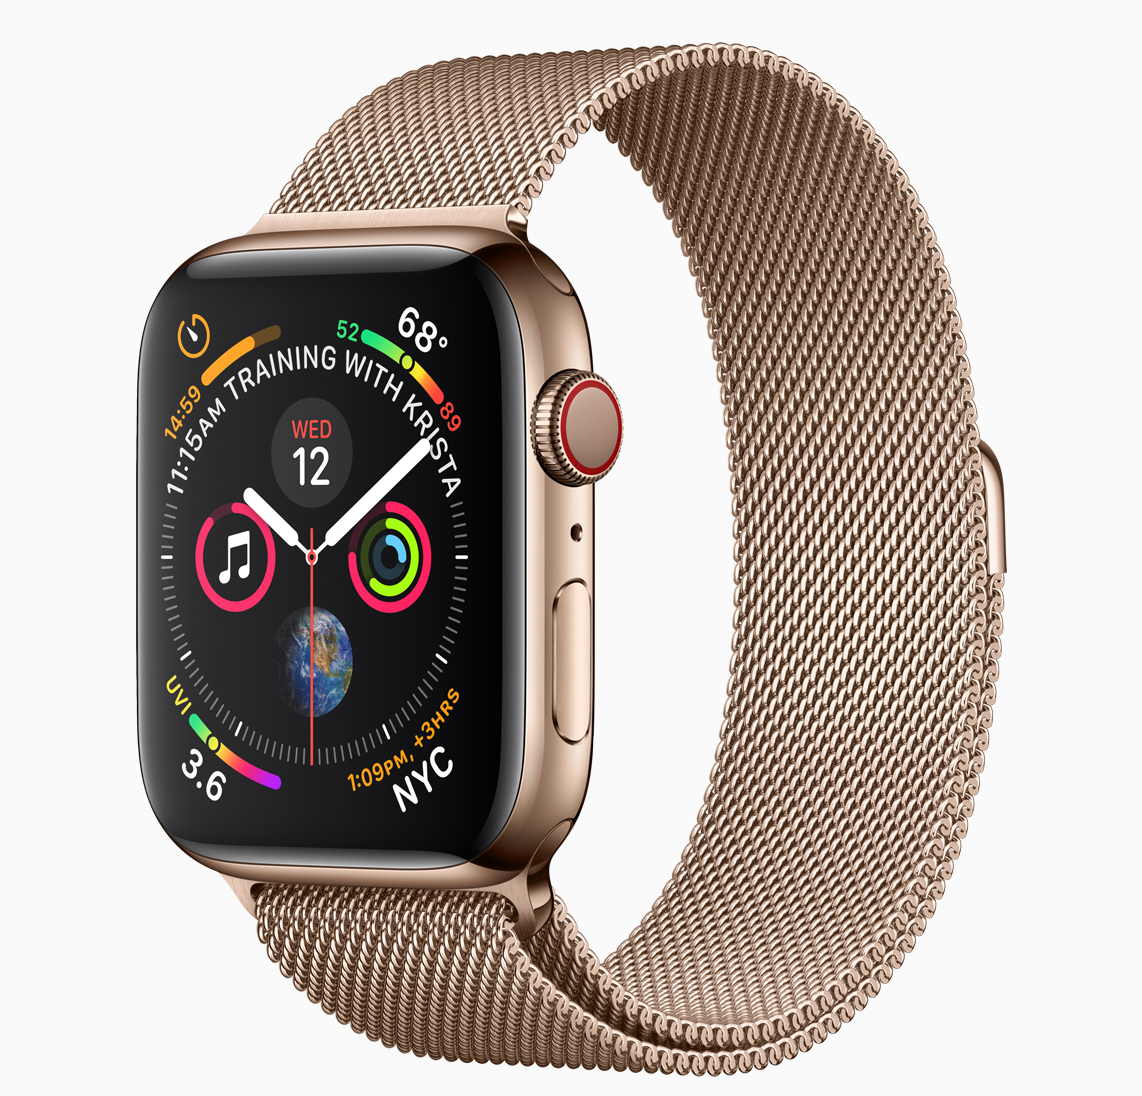 Designed for use in all sorts of workouts, the Apple Watch Series 4 runs watchOS 5 and includes a wide variety of digital watch face options ready for customizing. Image: Apple.